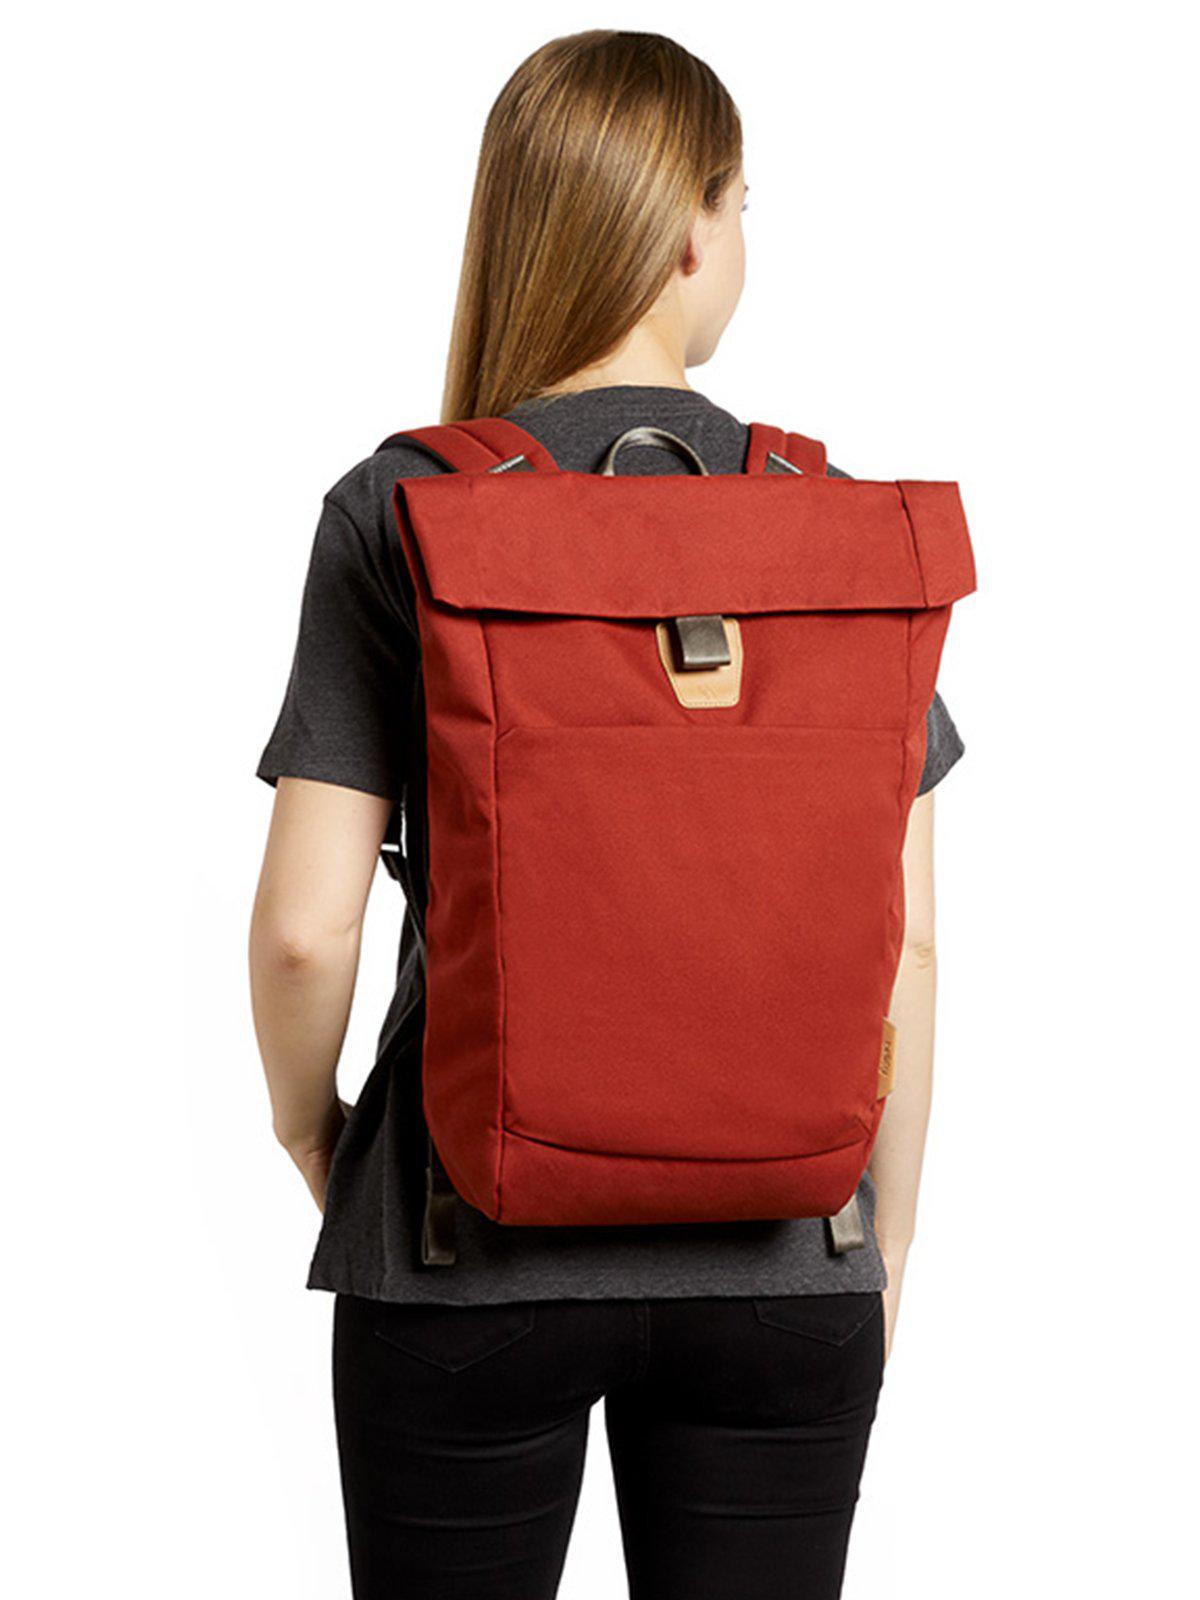 Bellroy Studio Backpack Red Ochre - MORE by Morello Indonesia